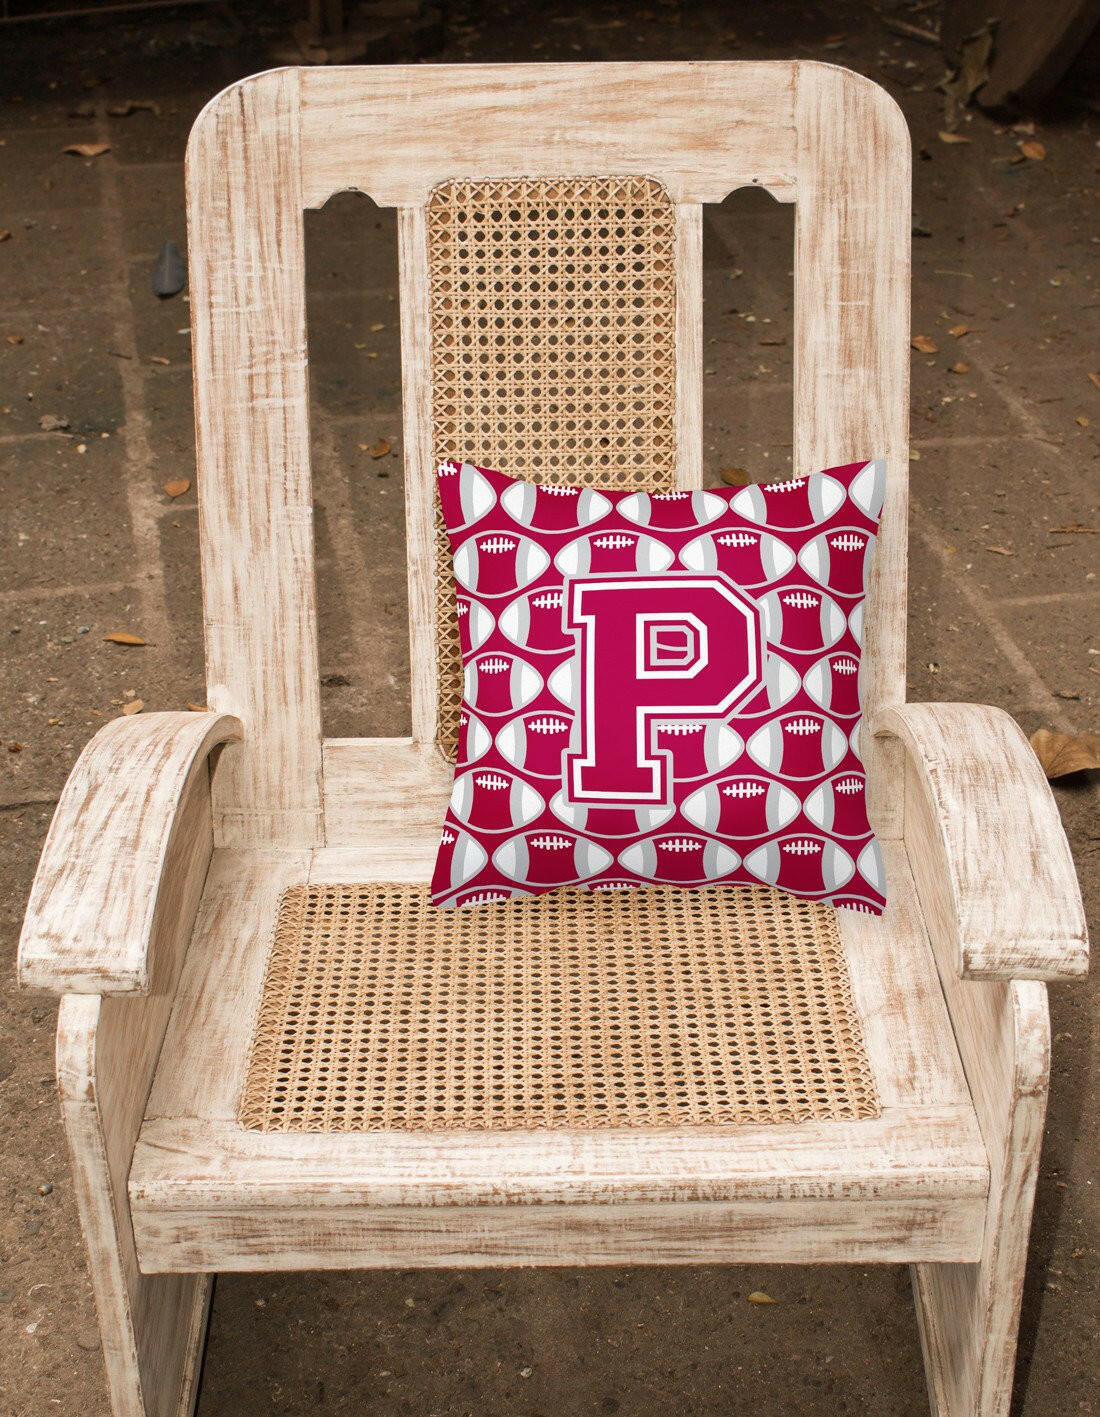 Letter P Football Crimson, grey and white Fabric Decorative Pillow CJ1065-PPW1414 by Caroline's Treasures